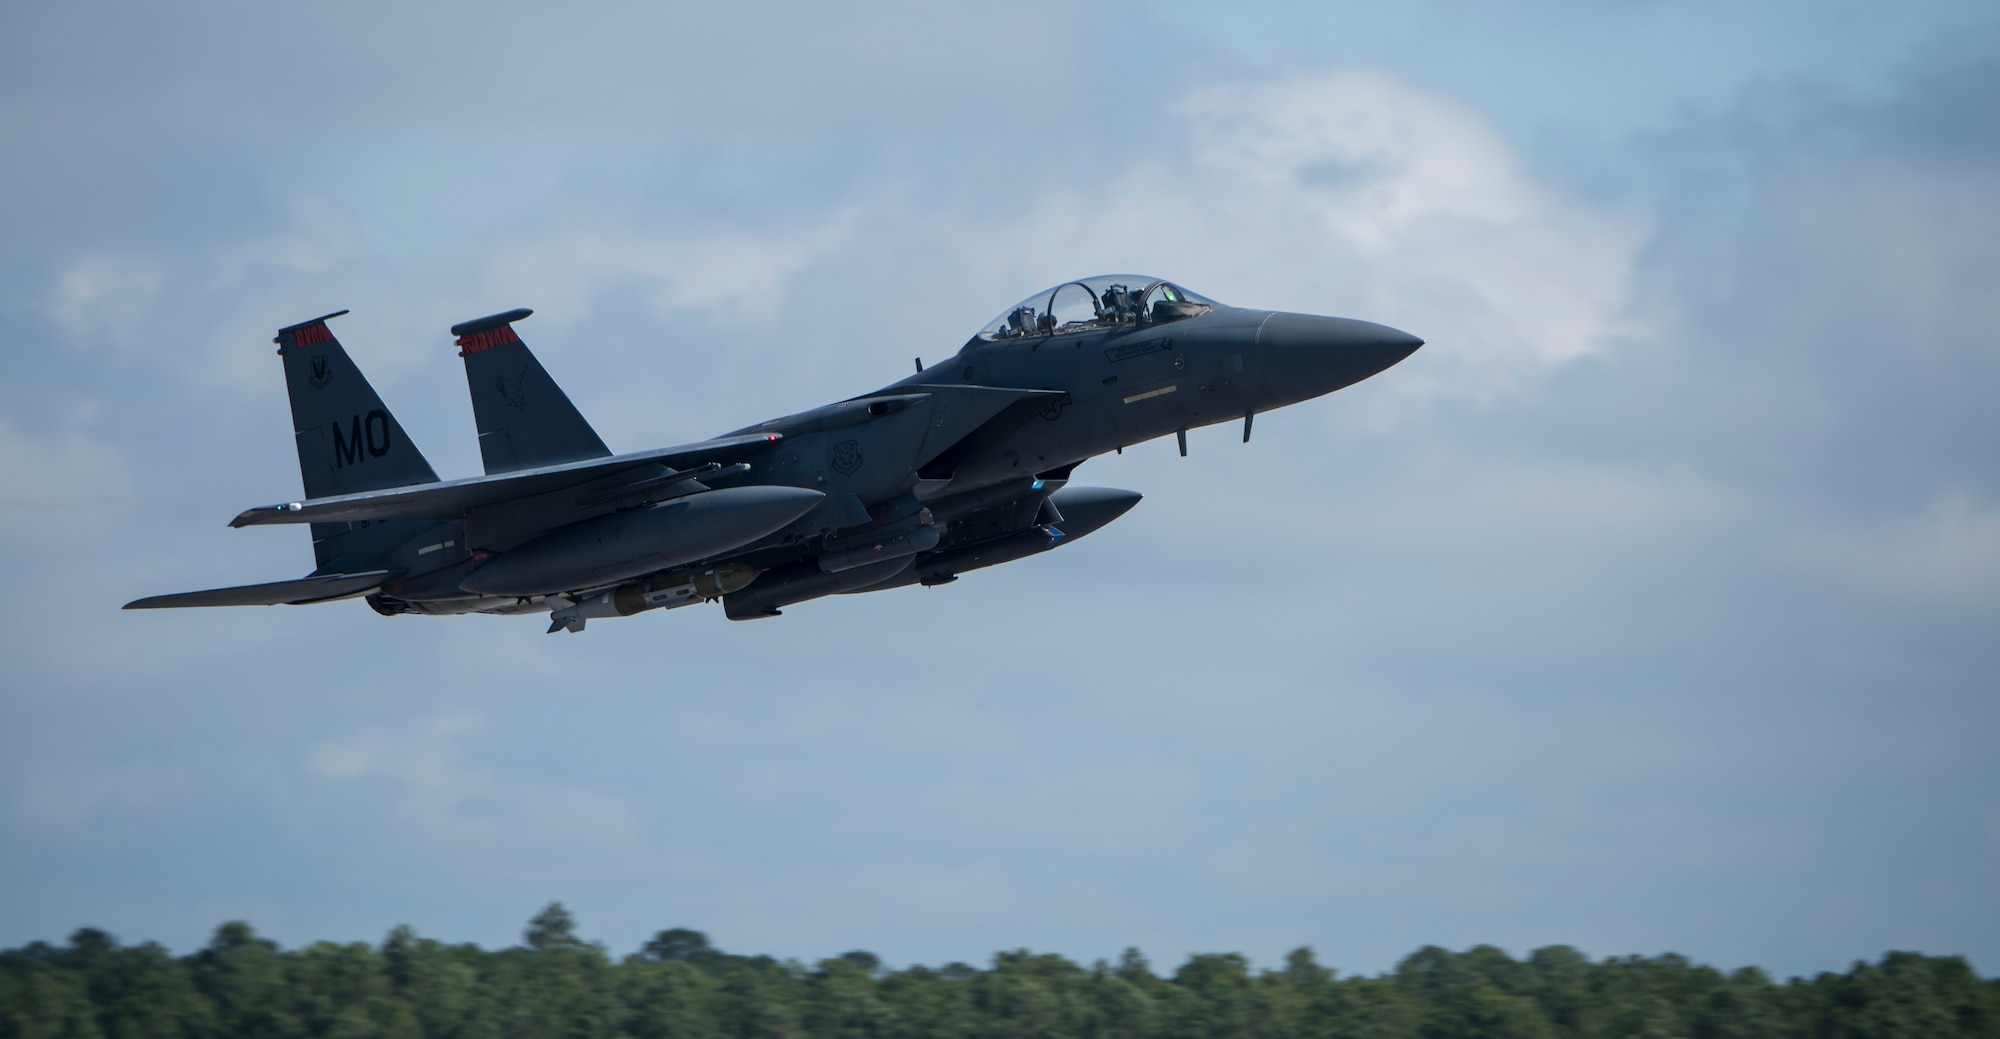 Image of an F-15E Strike Eagle taking off from Tyndall Air Force Base, Florida, April 3, 2018. The 391st Fighter Squadron recently traveled to Florida to participate in Combat Archer and Hammer. (U.S. Air Force photo by Staff Sgt Jeremy L. Mosier)